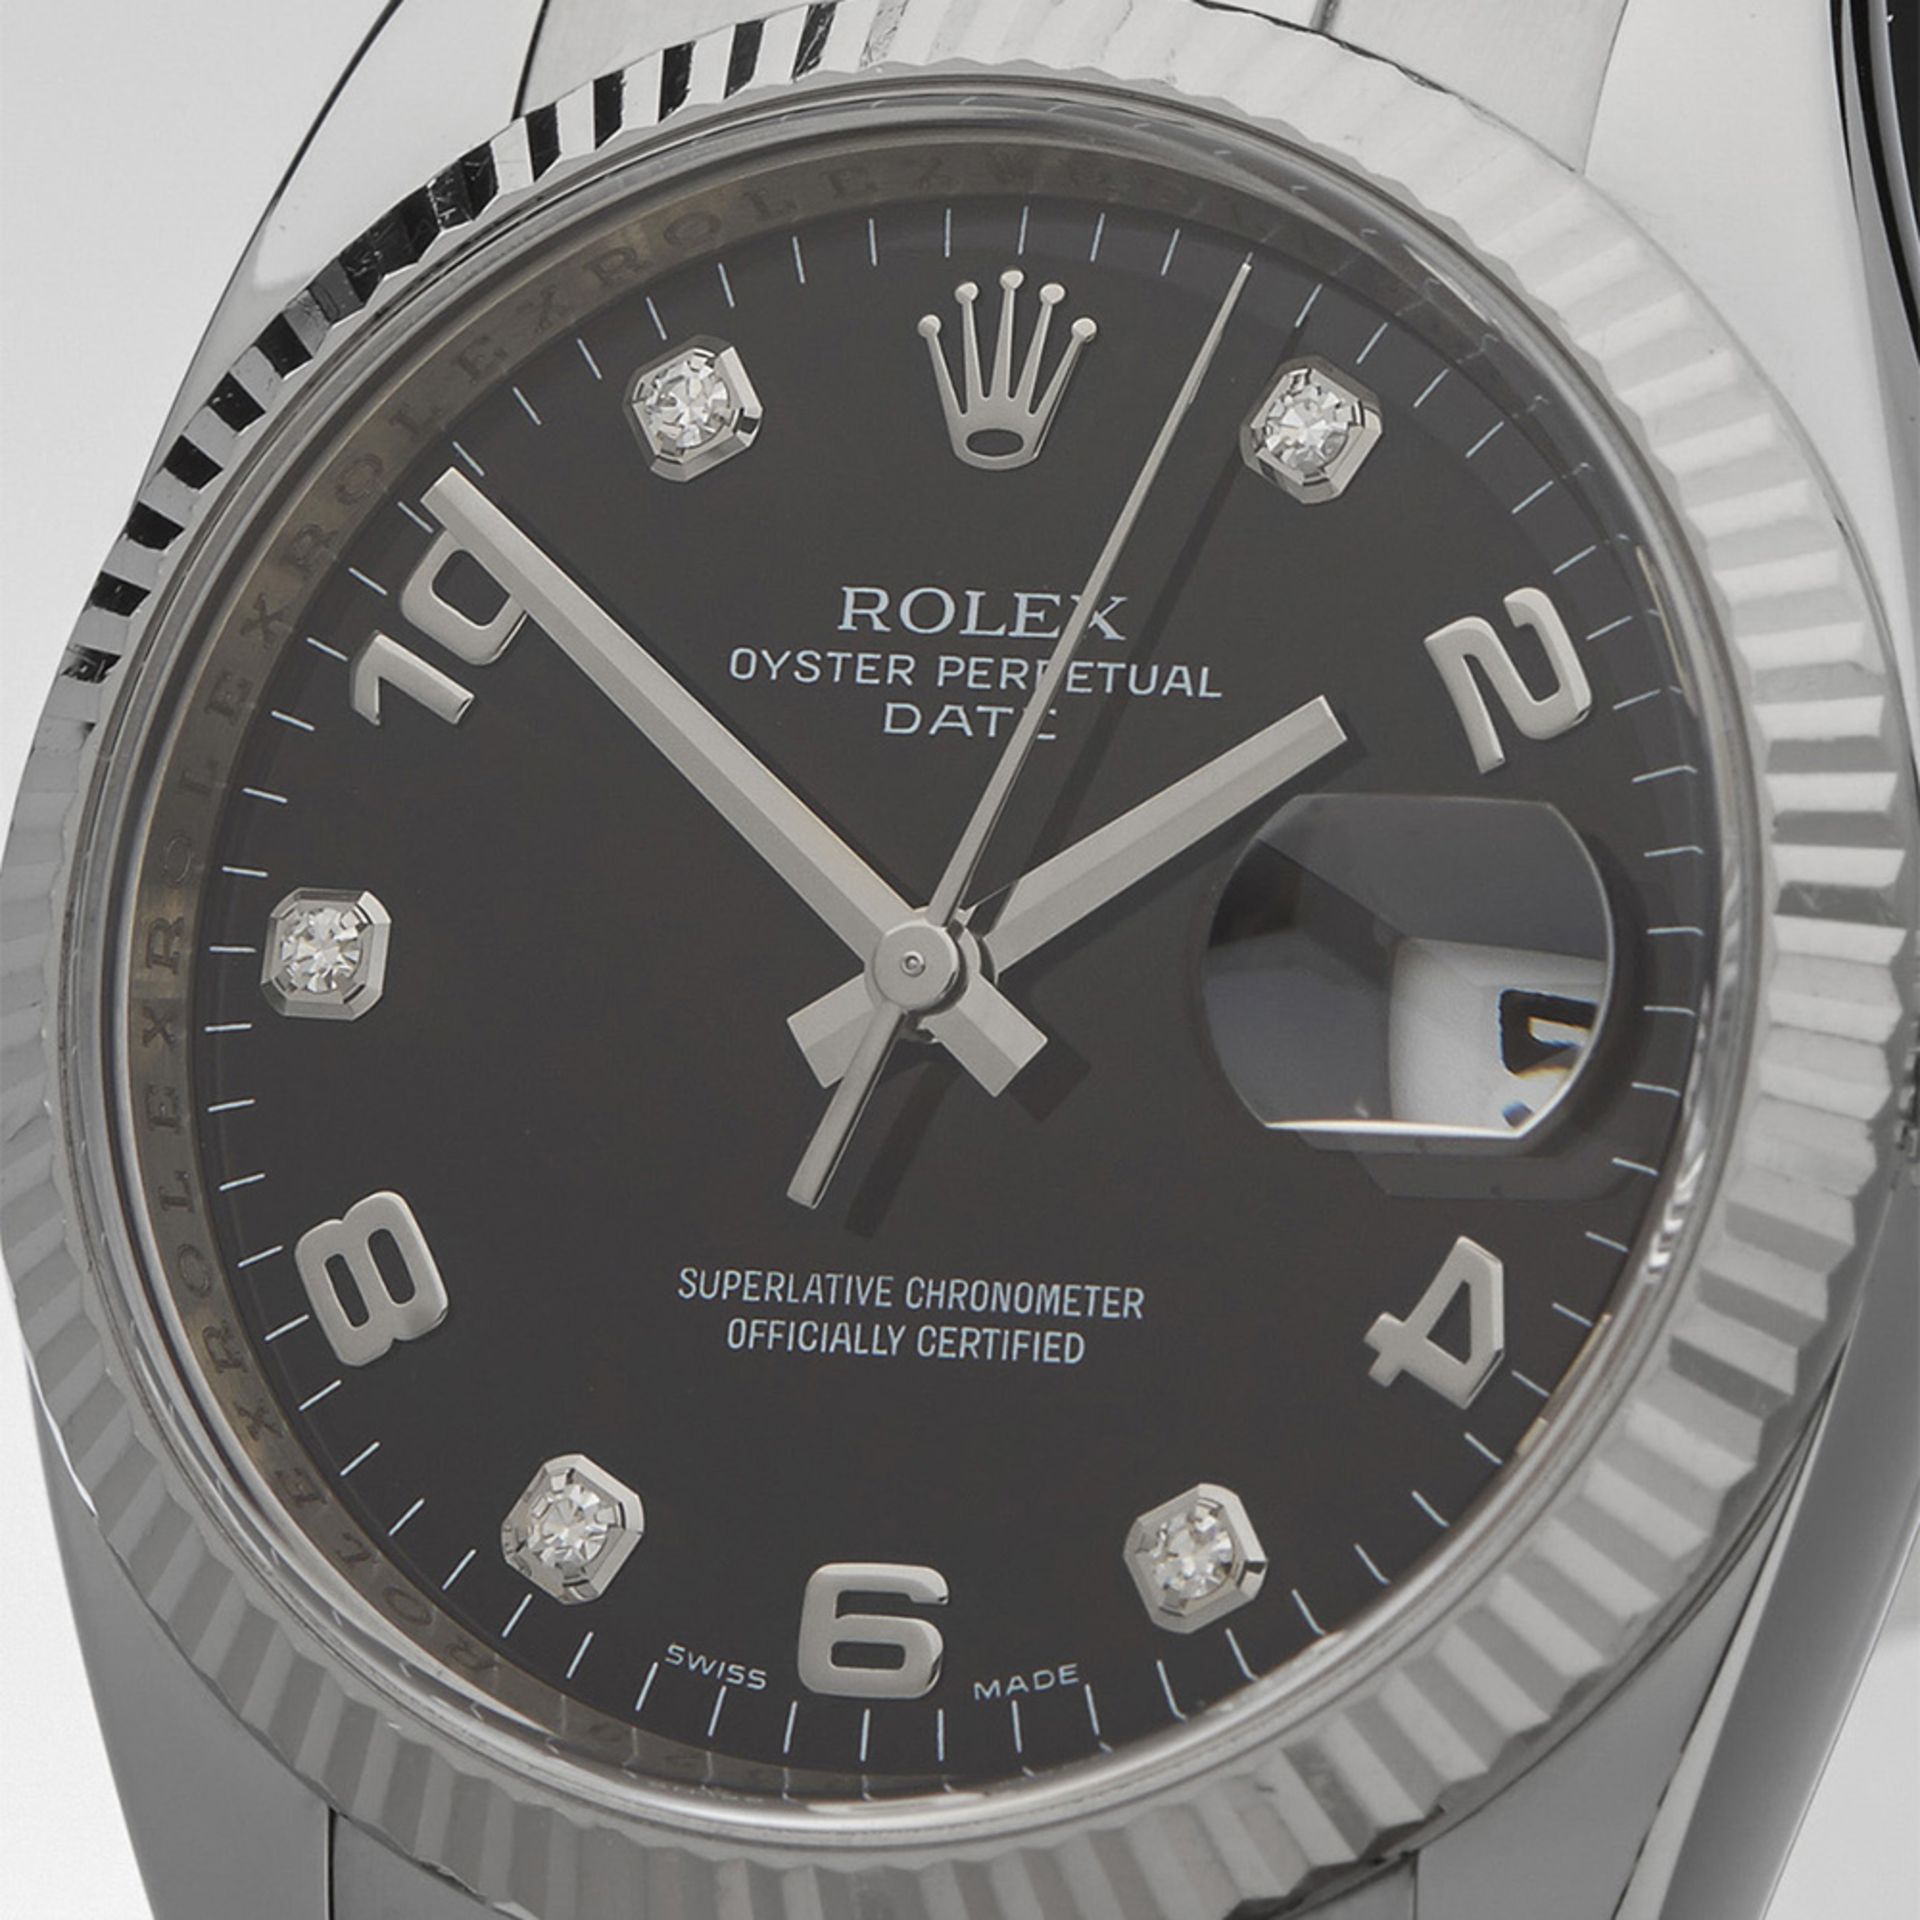 Rolex, Oyster Perpetual Date 34mm Stainless Steel 115234